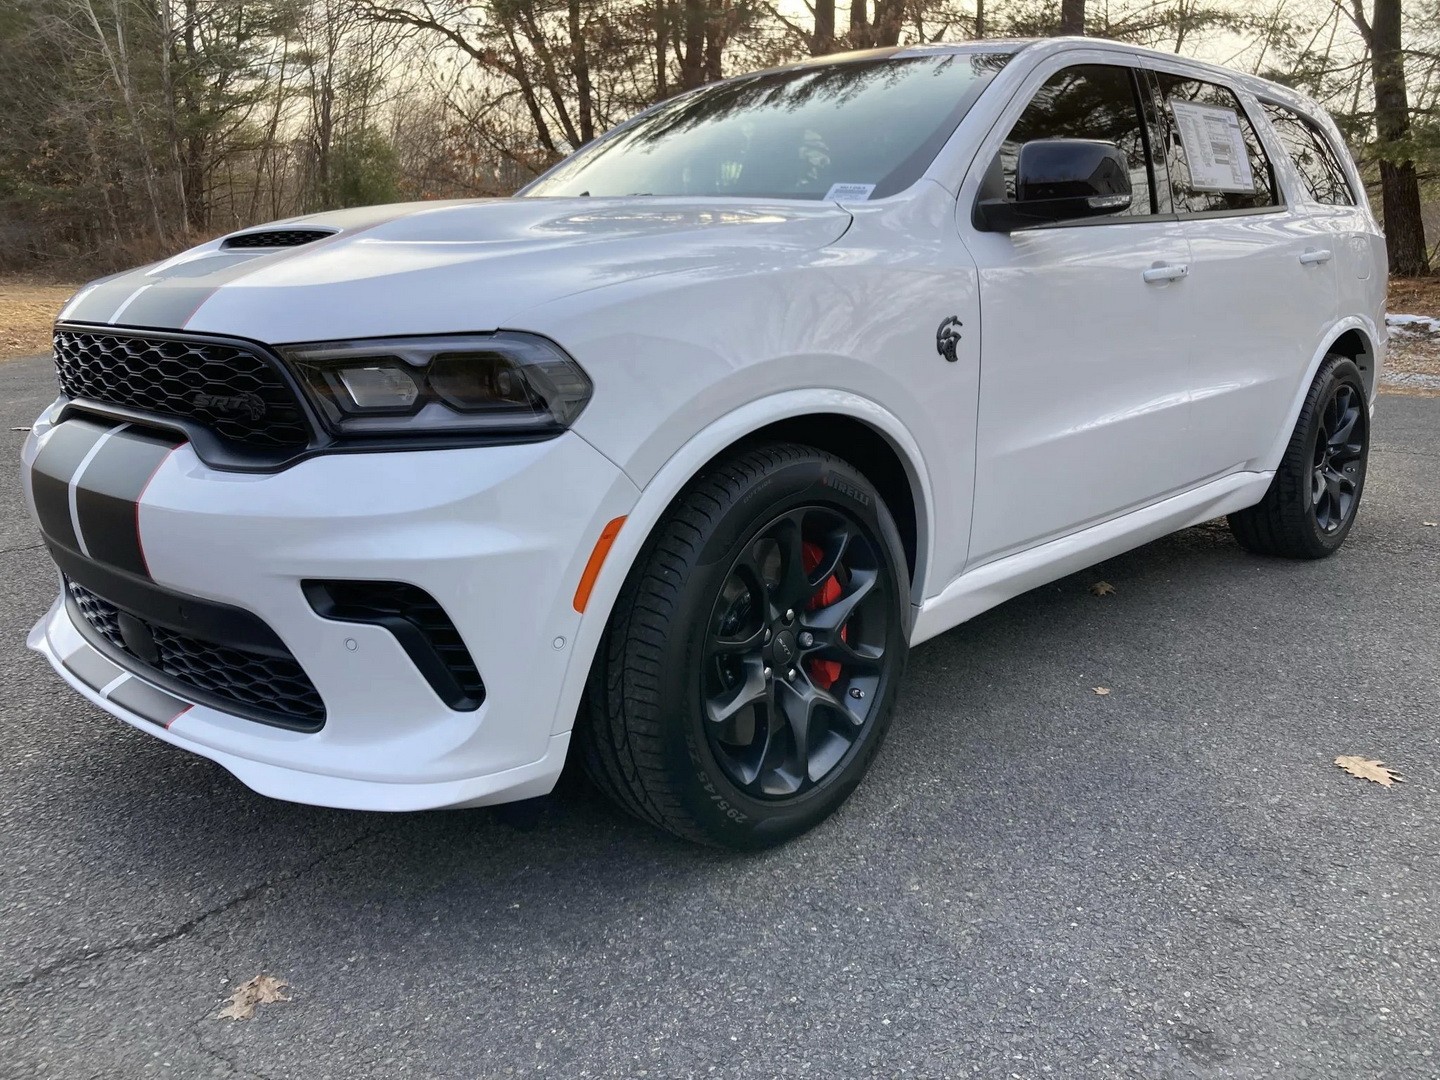 2021 Dodge Durango SRT Hellcat With Delivery Miles Is Begging to ...